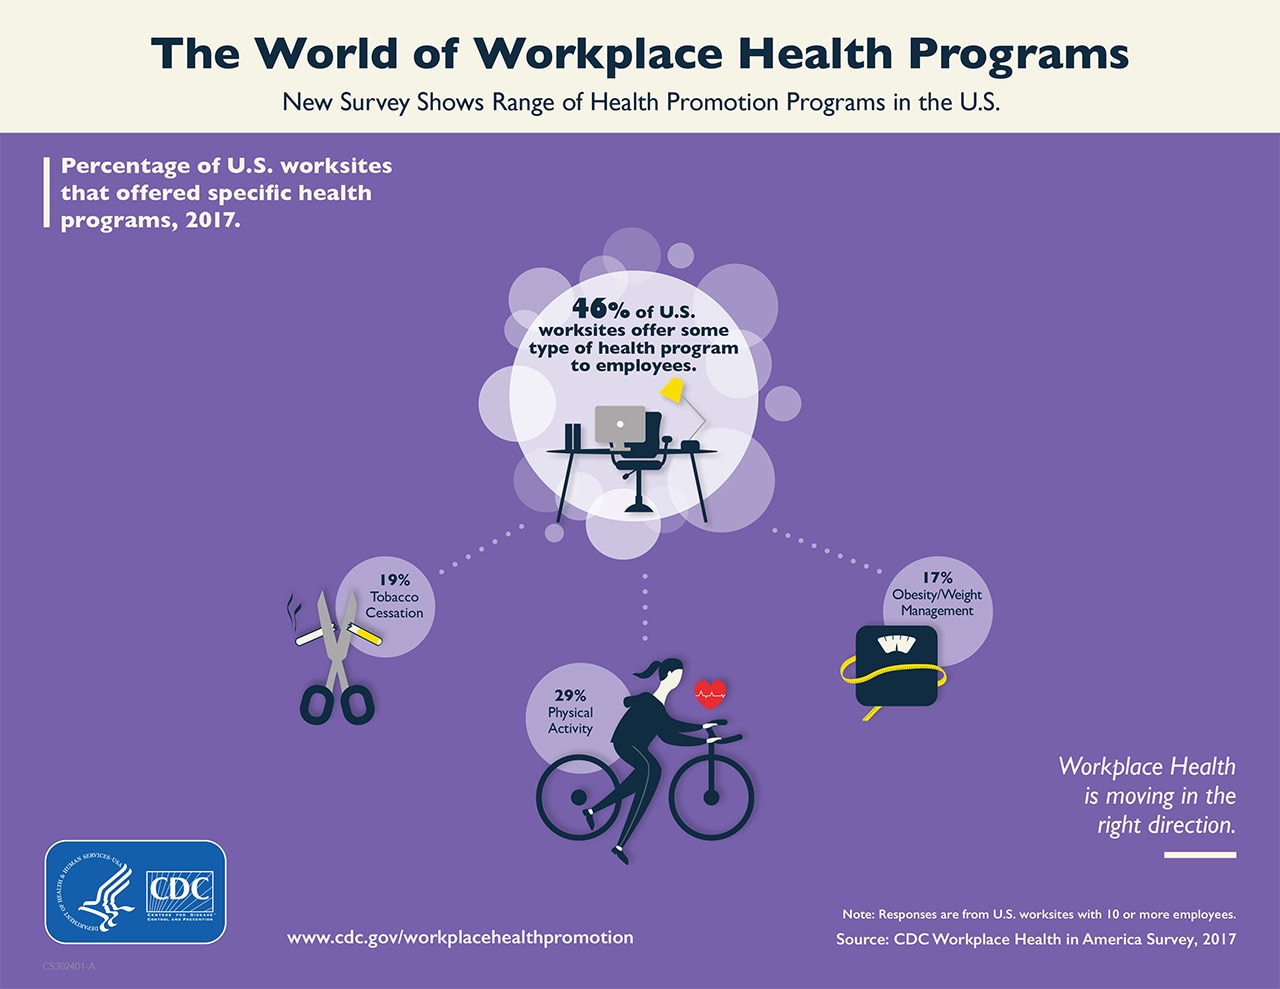 New Survey Shows Range of Health Promotion Programs in the U.S.